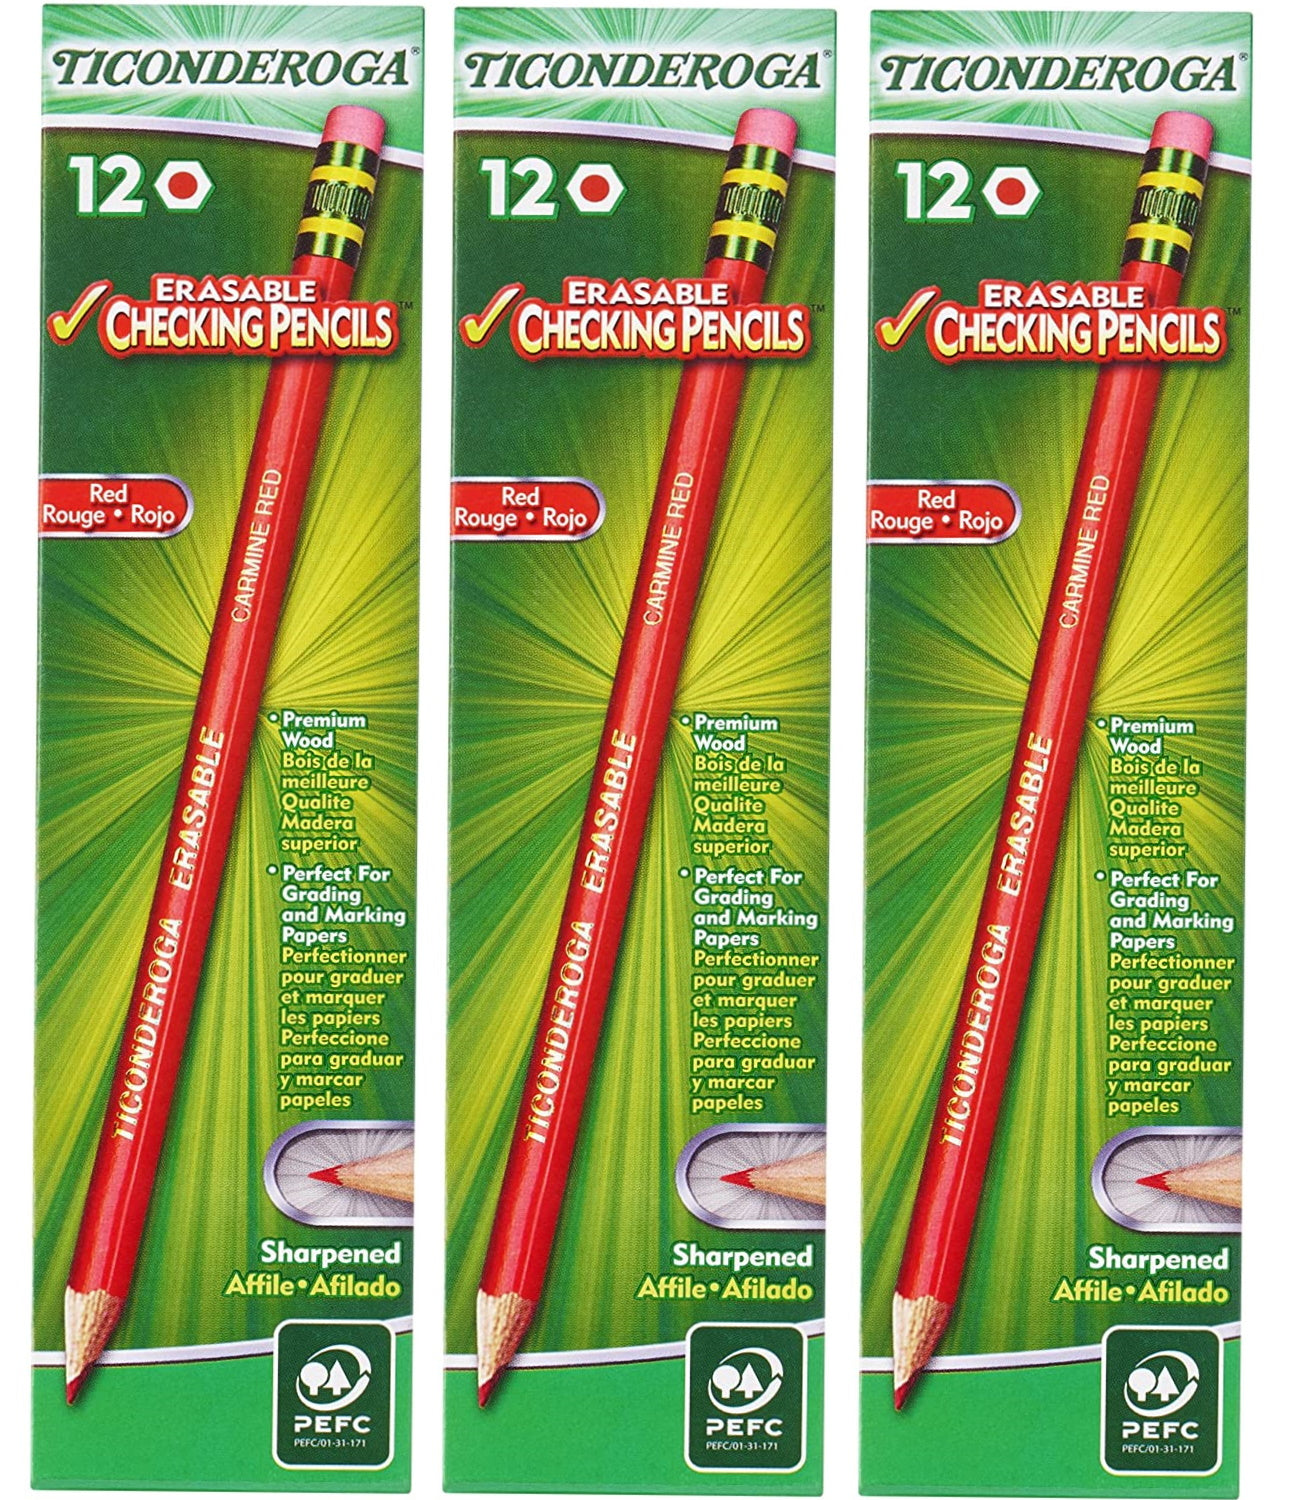 Ticonderoga Erasable Checking Pencils with Eraser, Pre-sharpened, 2.6 mm, 2B (#1), Carmine Red Lead - 3 Pack